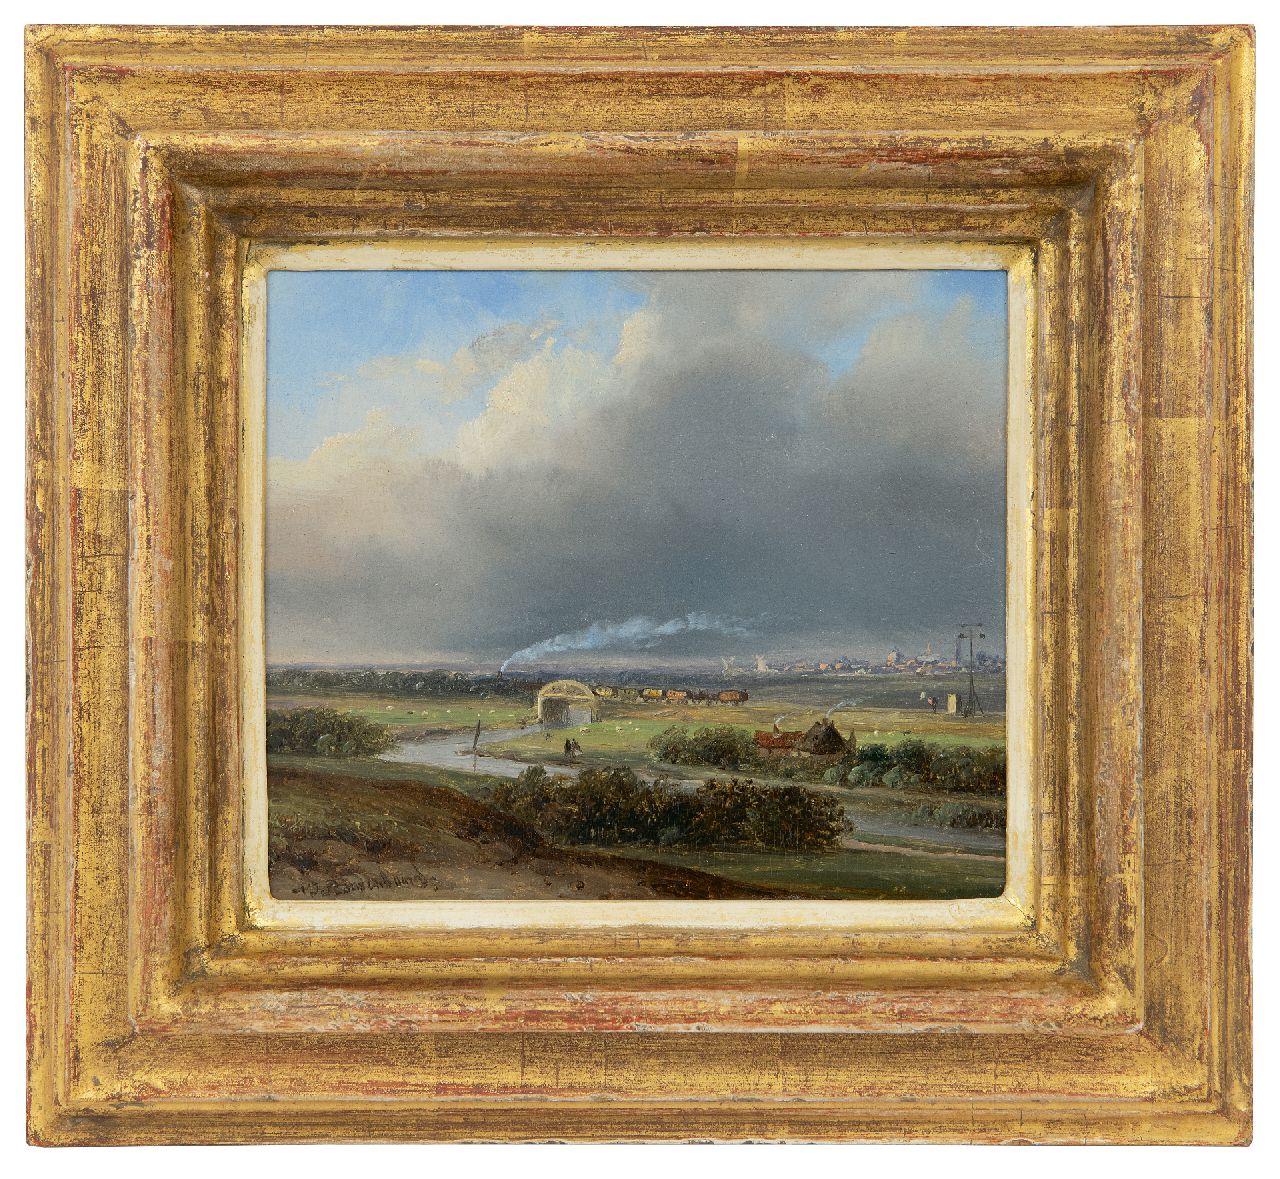 Roosenboom N.J.  | Nicolaas Johannes Roosenboom | Paintings offered for sale | A panoramic landscape with a steam train in the distance, oil on panel 13.7 x 15.8 cm, signed l.l.